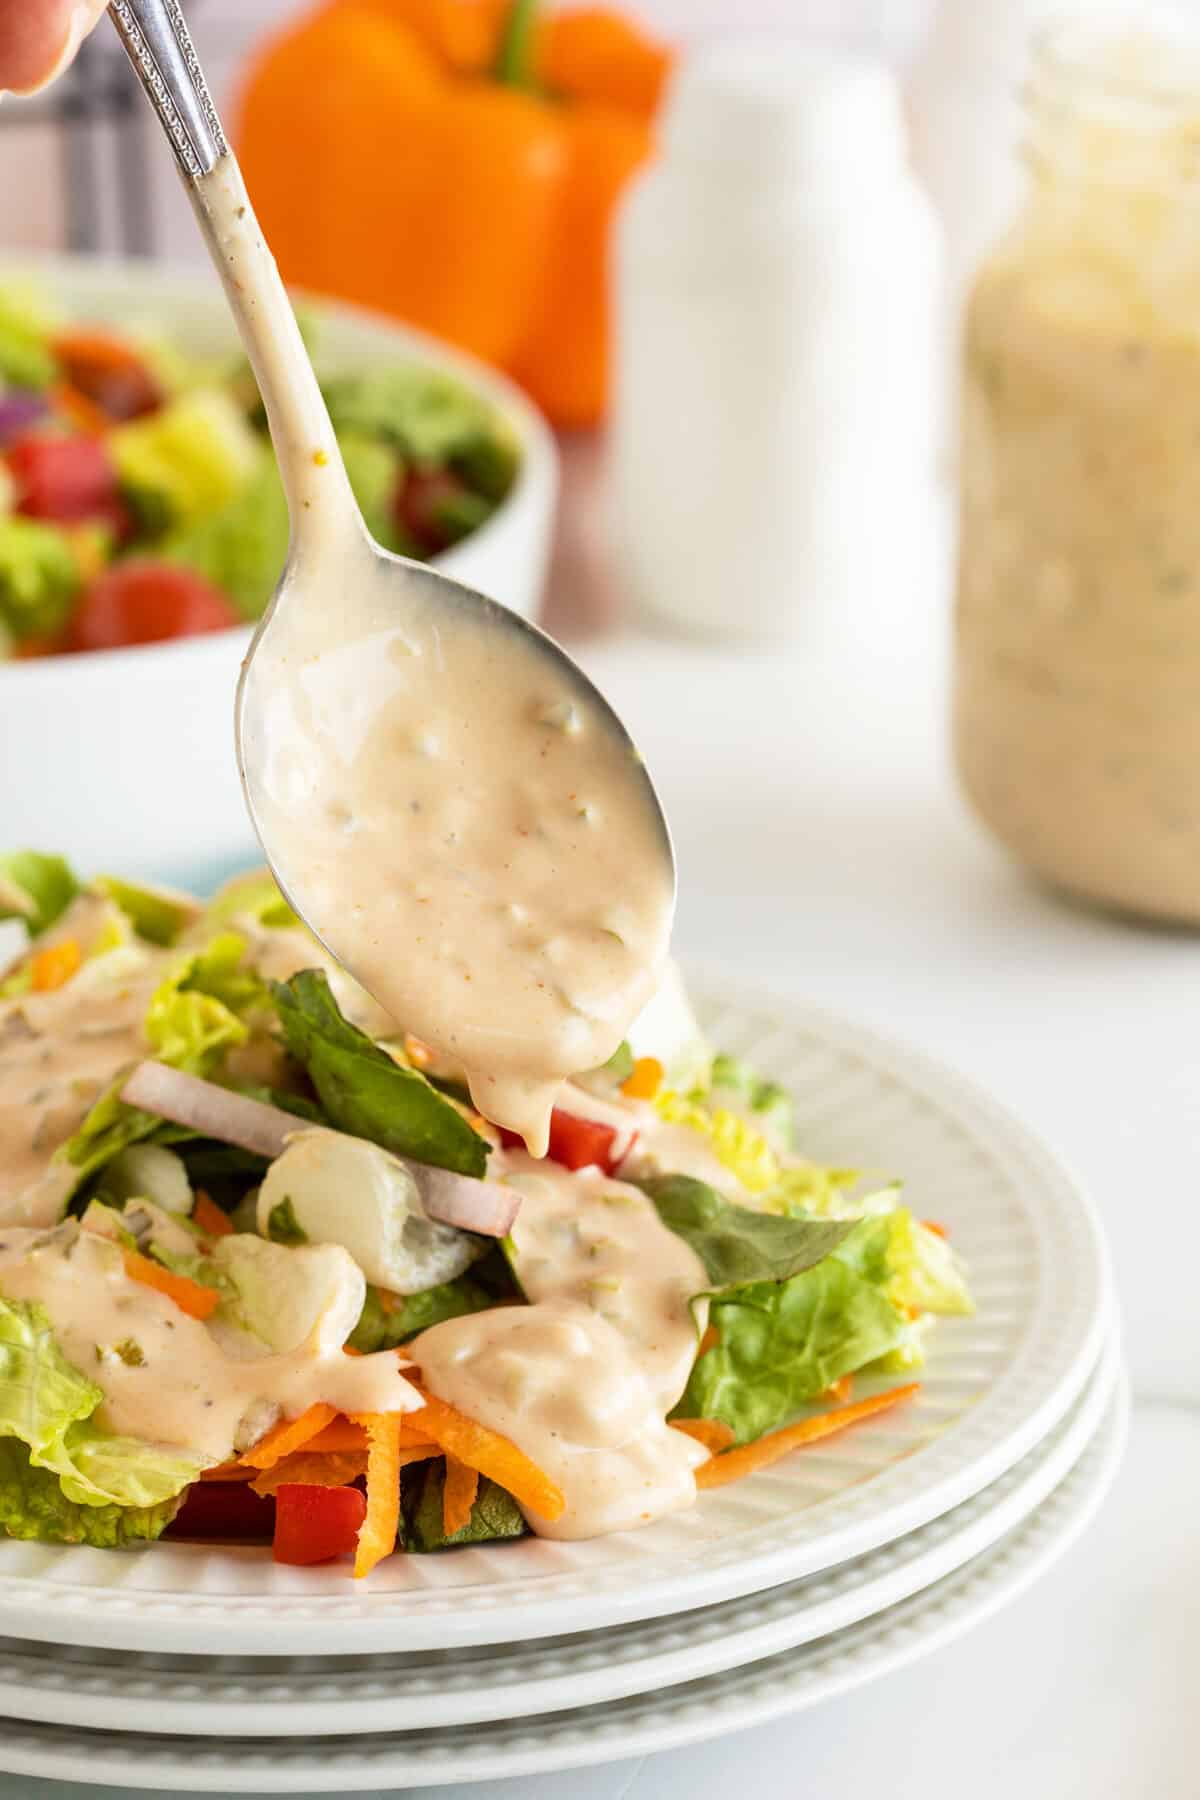 thousand island dressing dripping off a spoon onto a salad